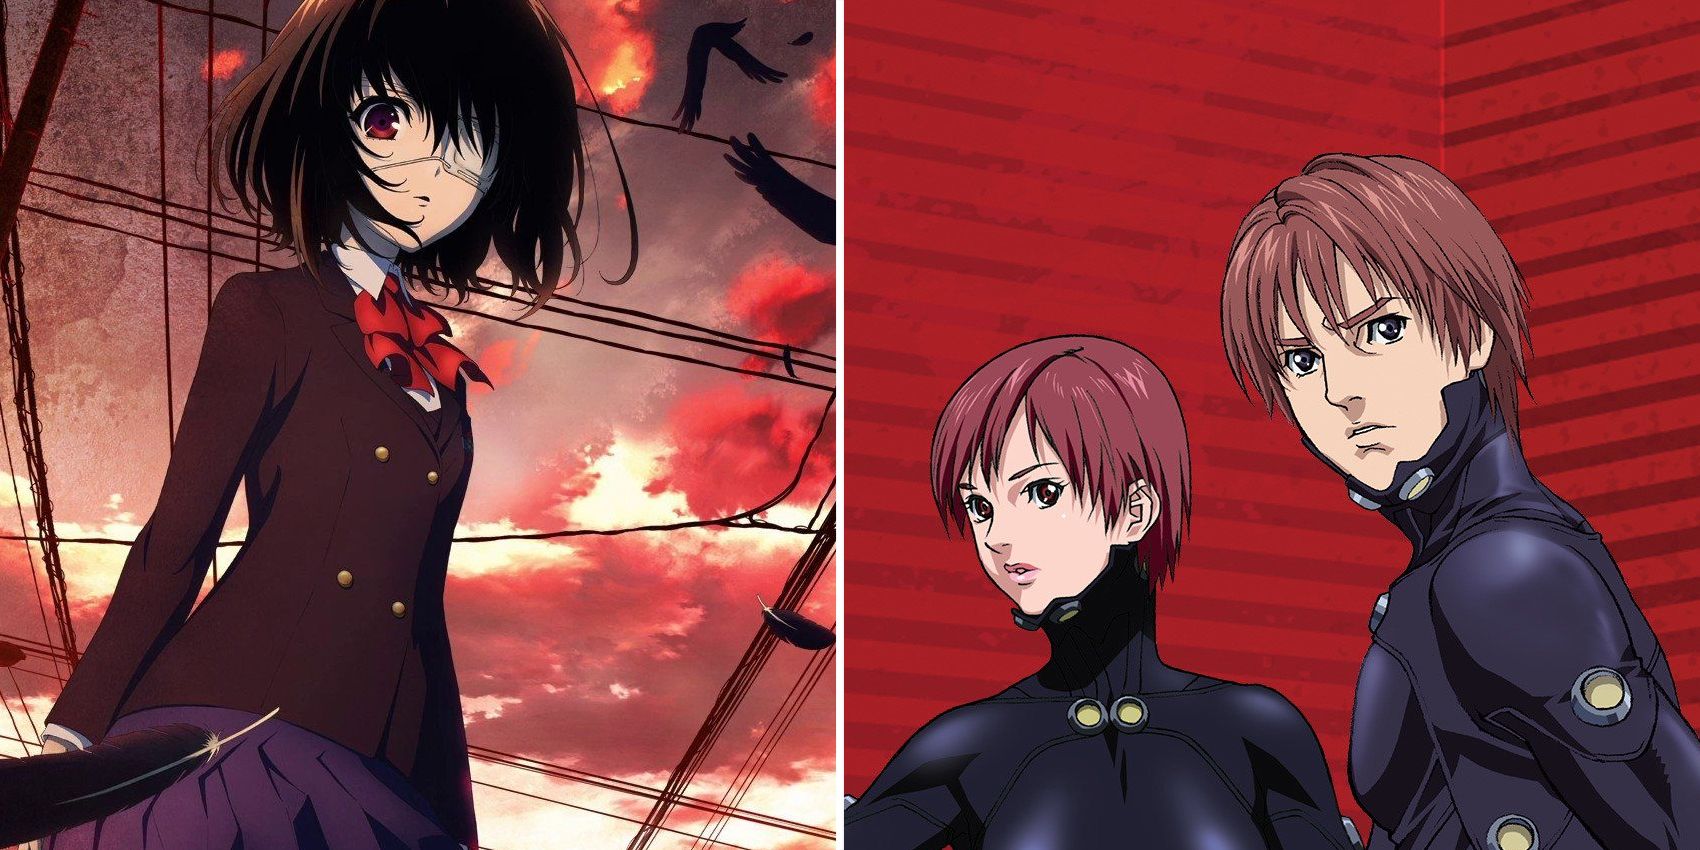 5 Modern Horror Anime To Watch (& 5 Classics That Can't Be Topped)